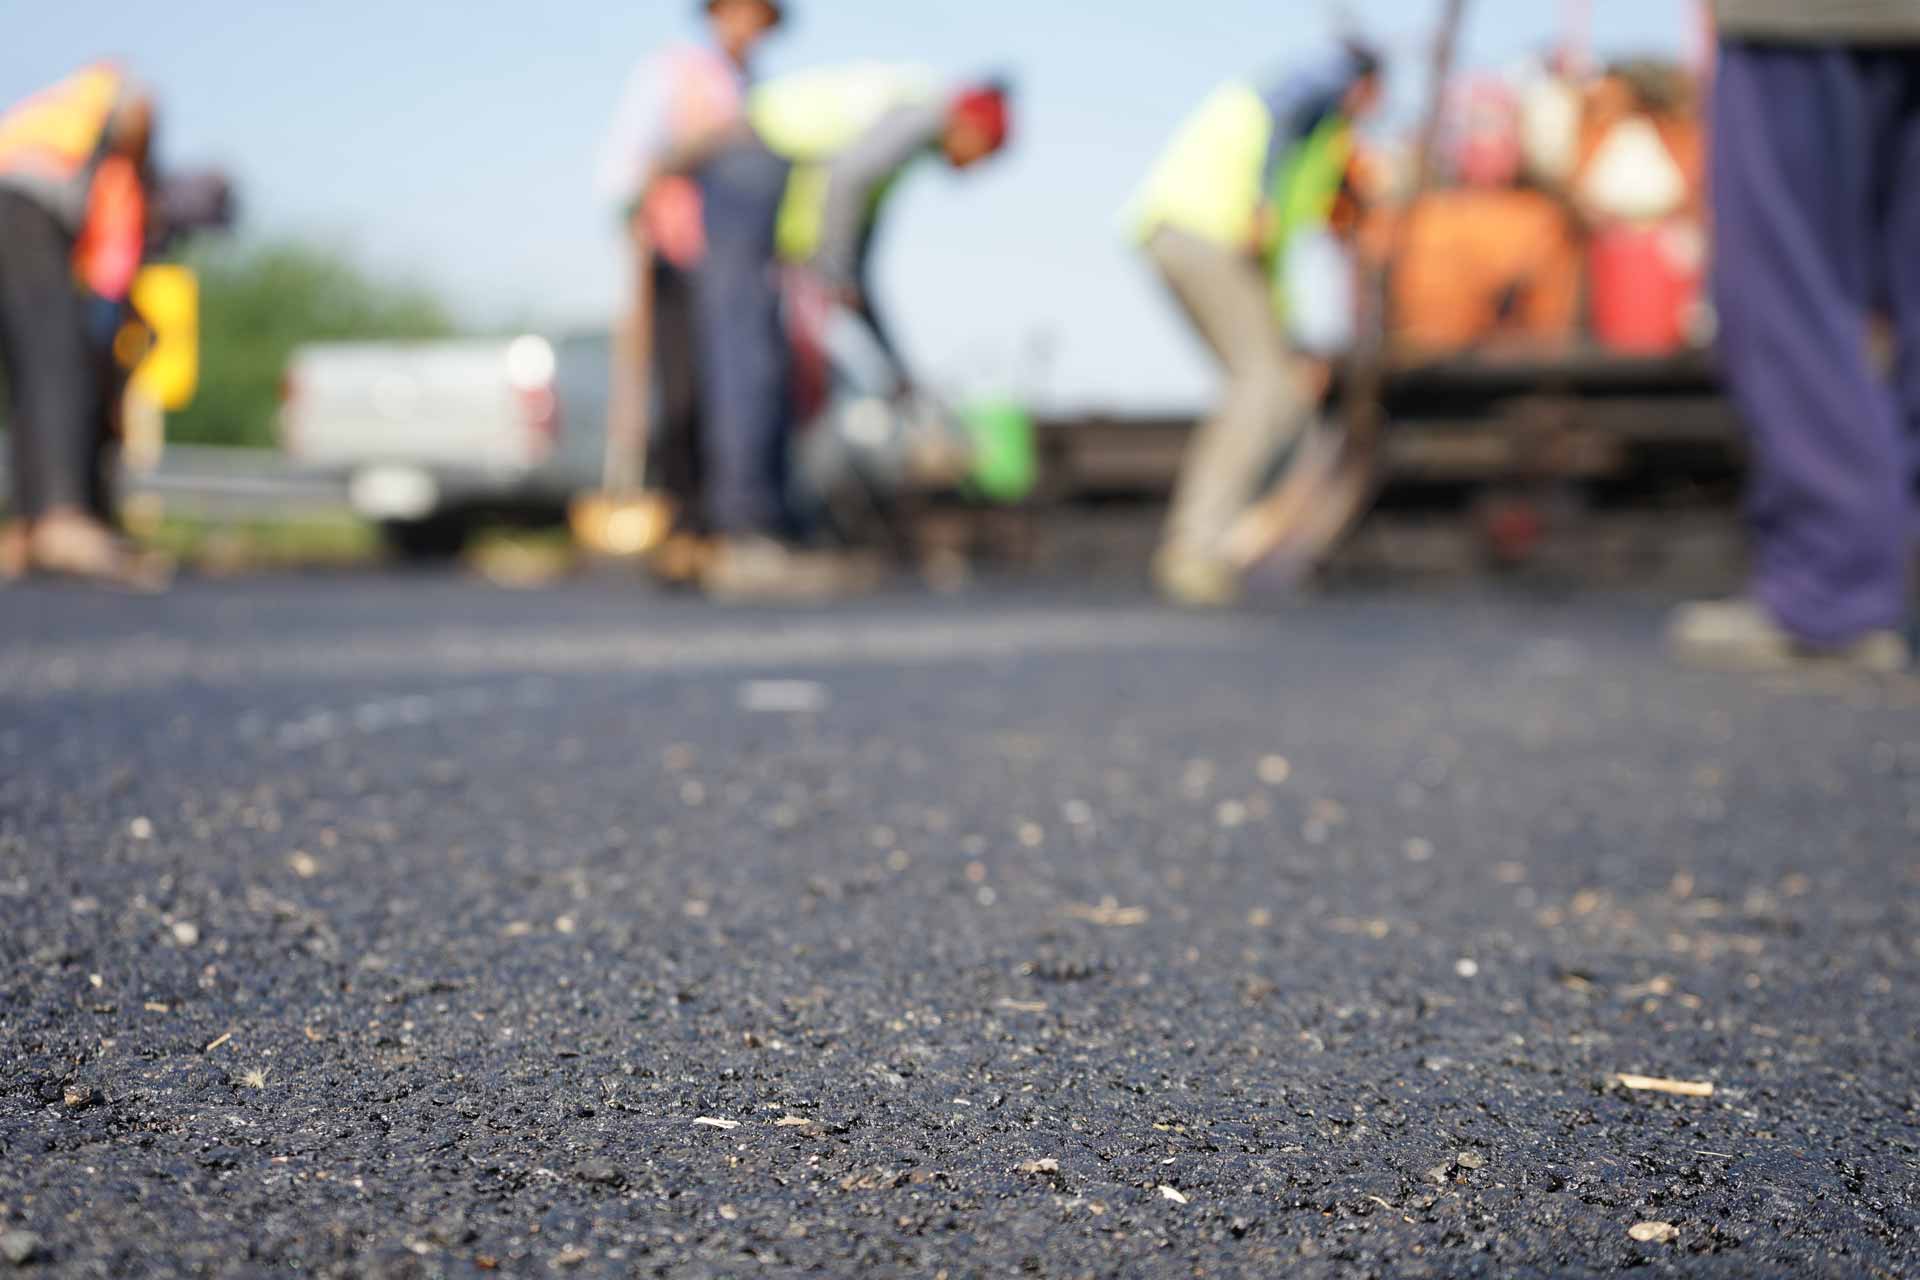 Construction workers on the asphalt road